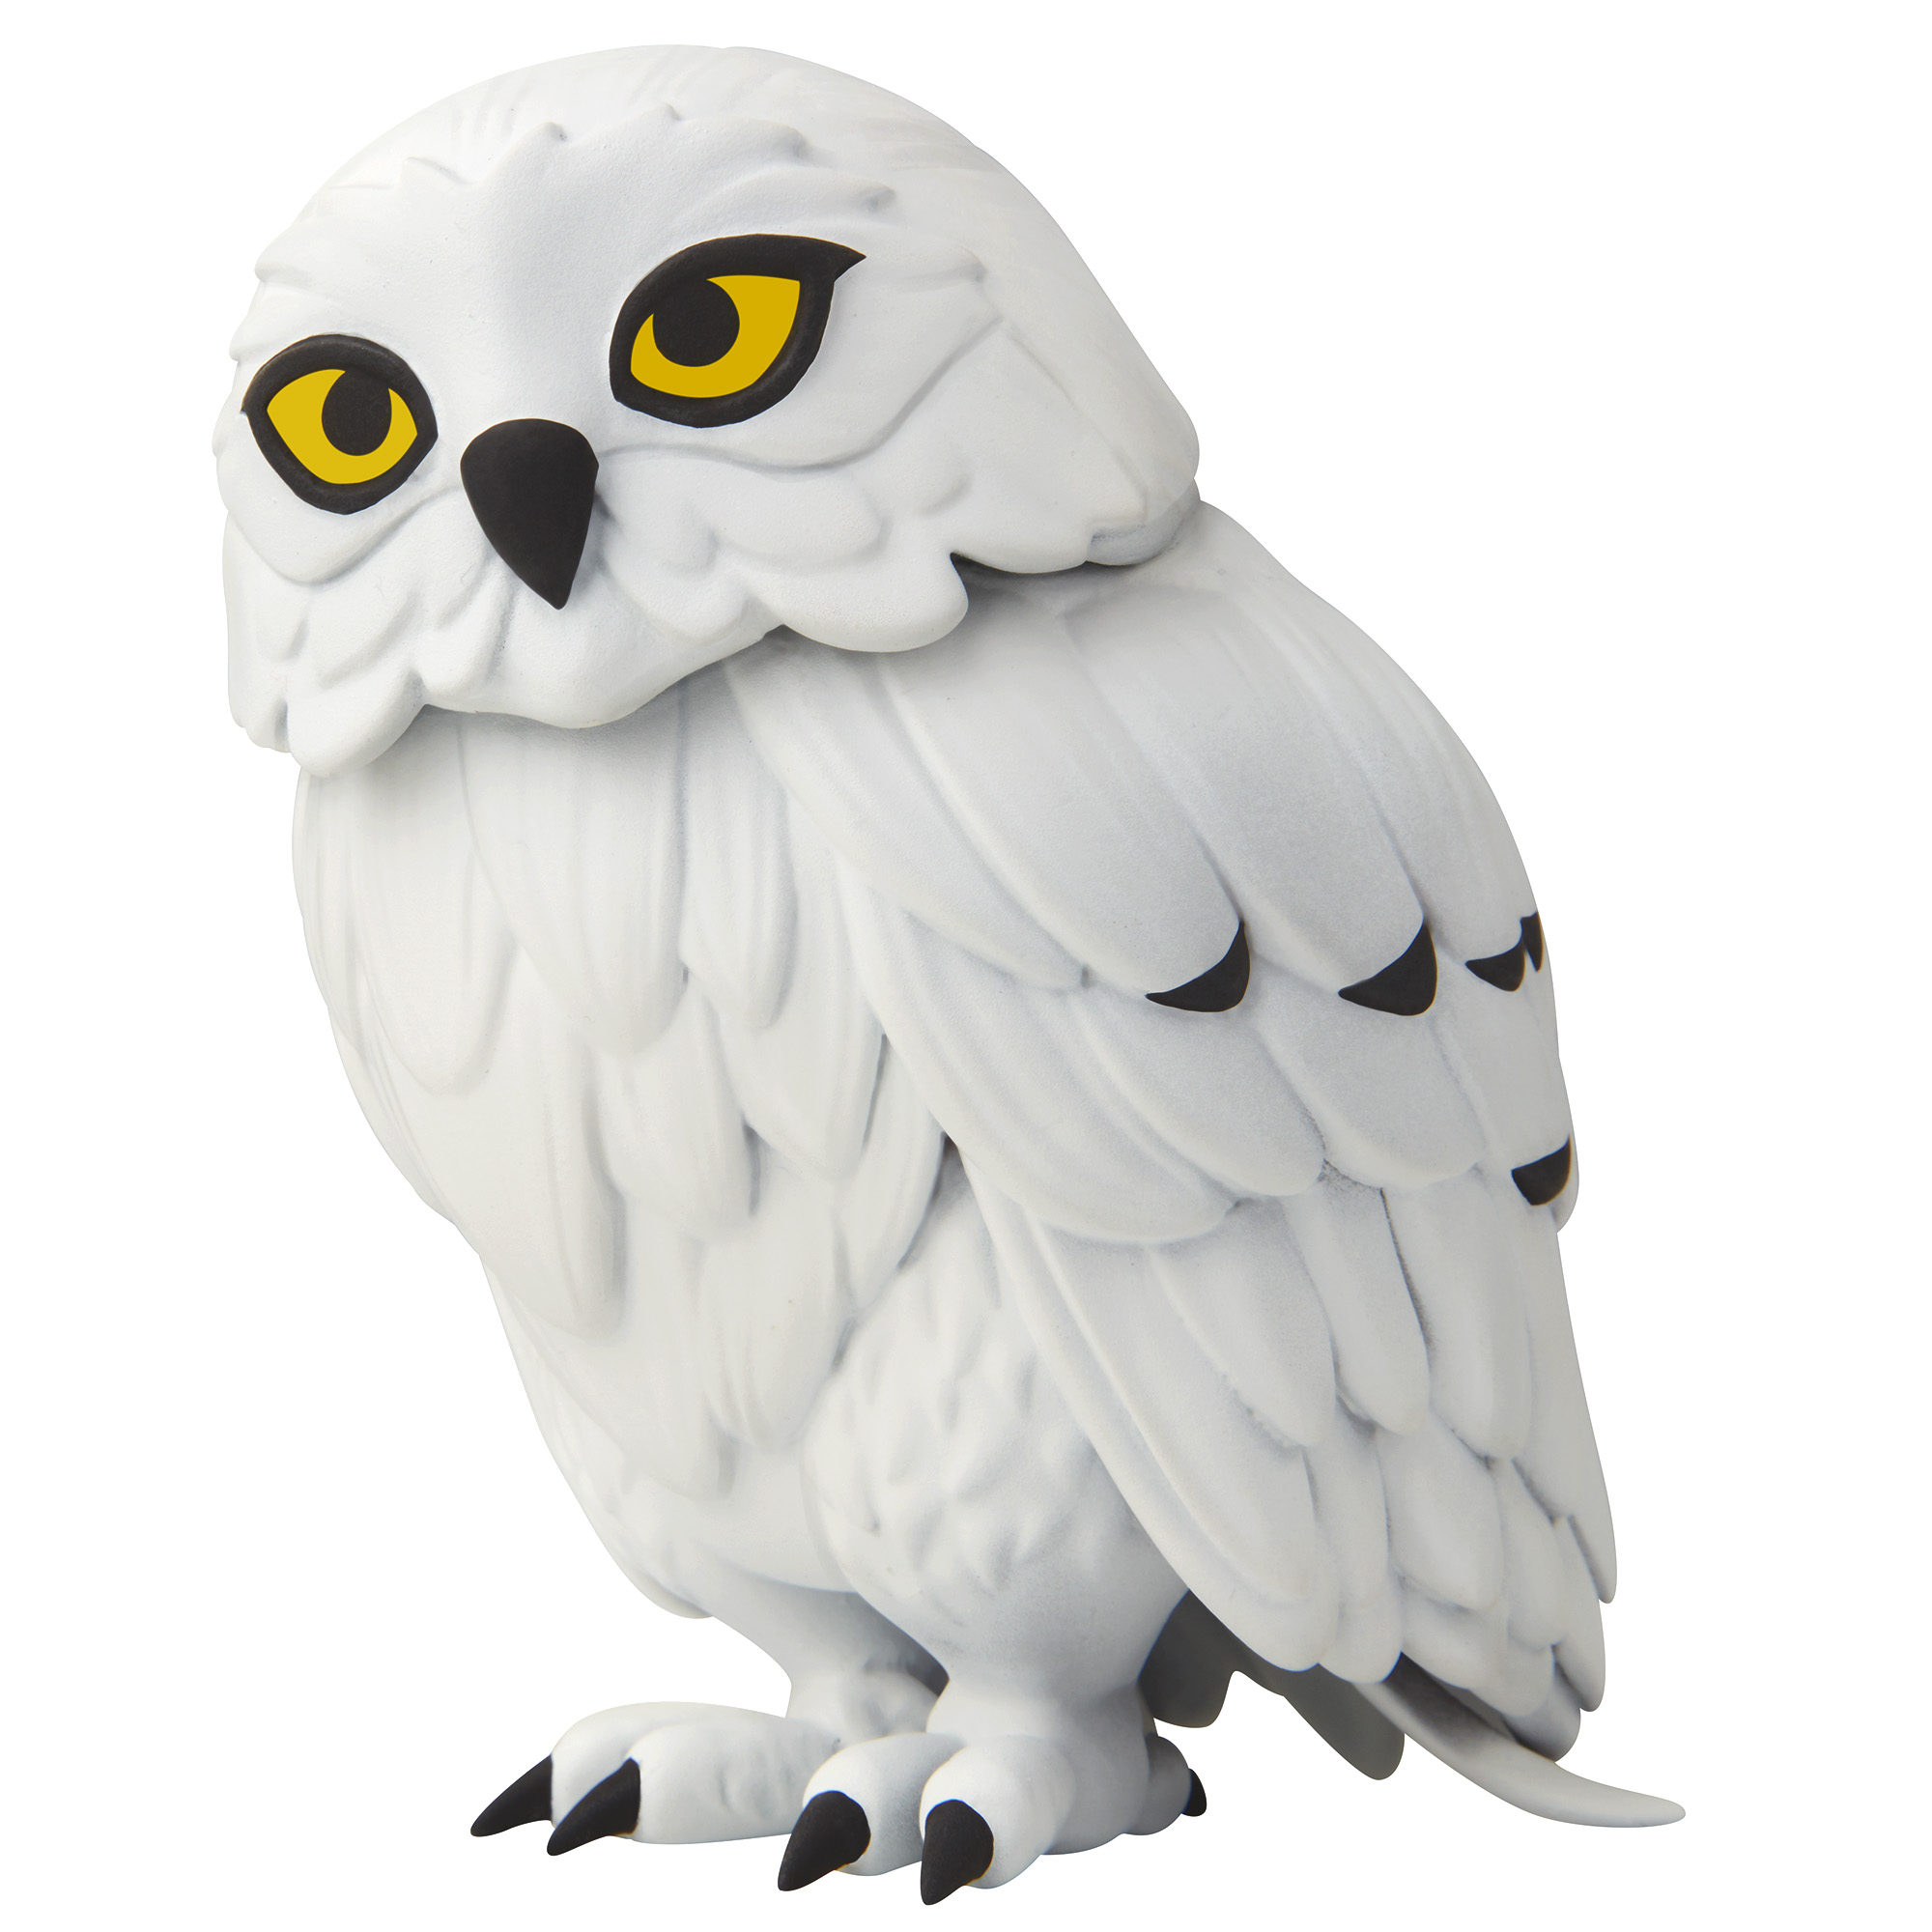 Harry Potter Hedwig Interactive Creature